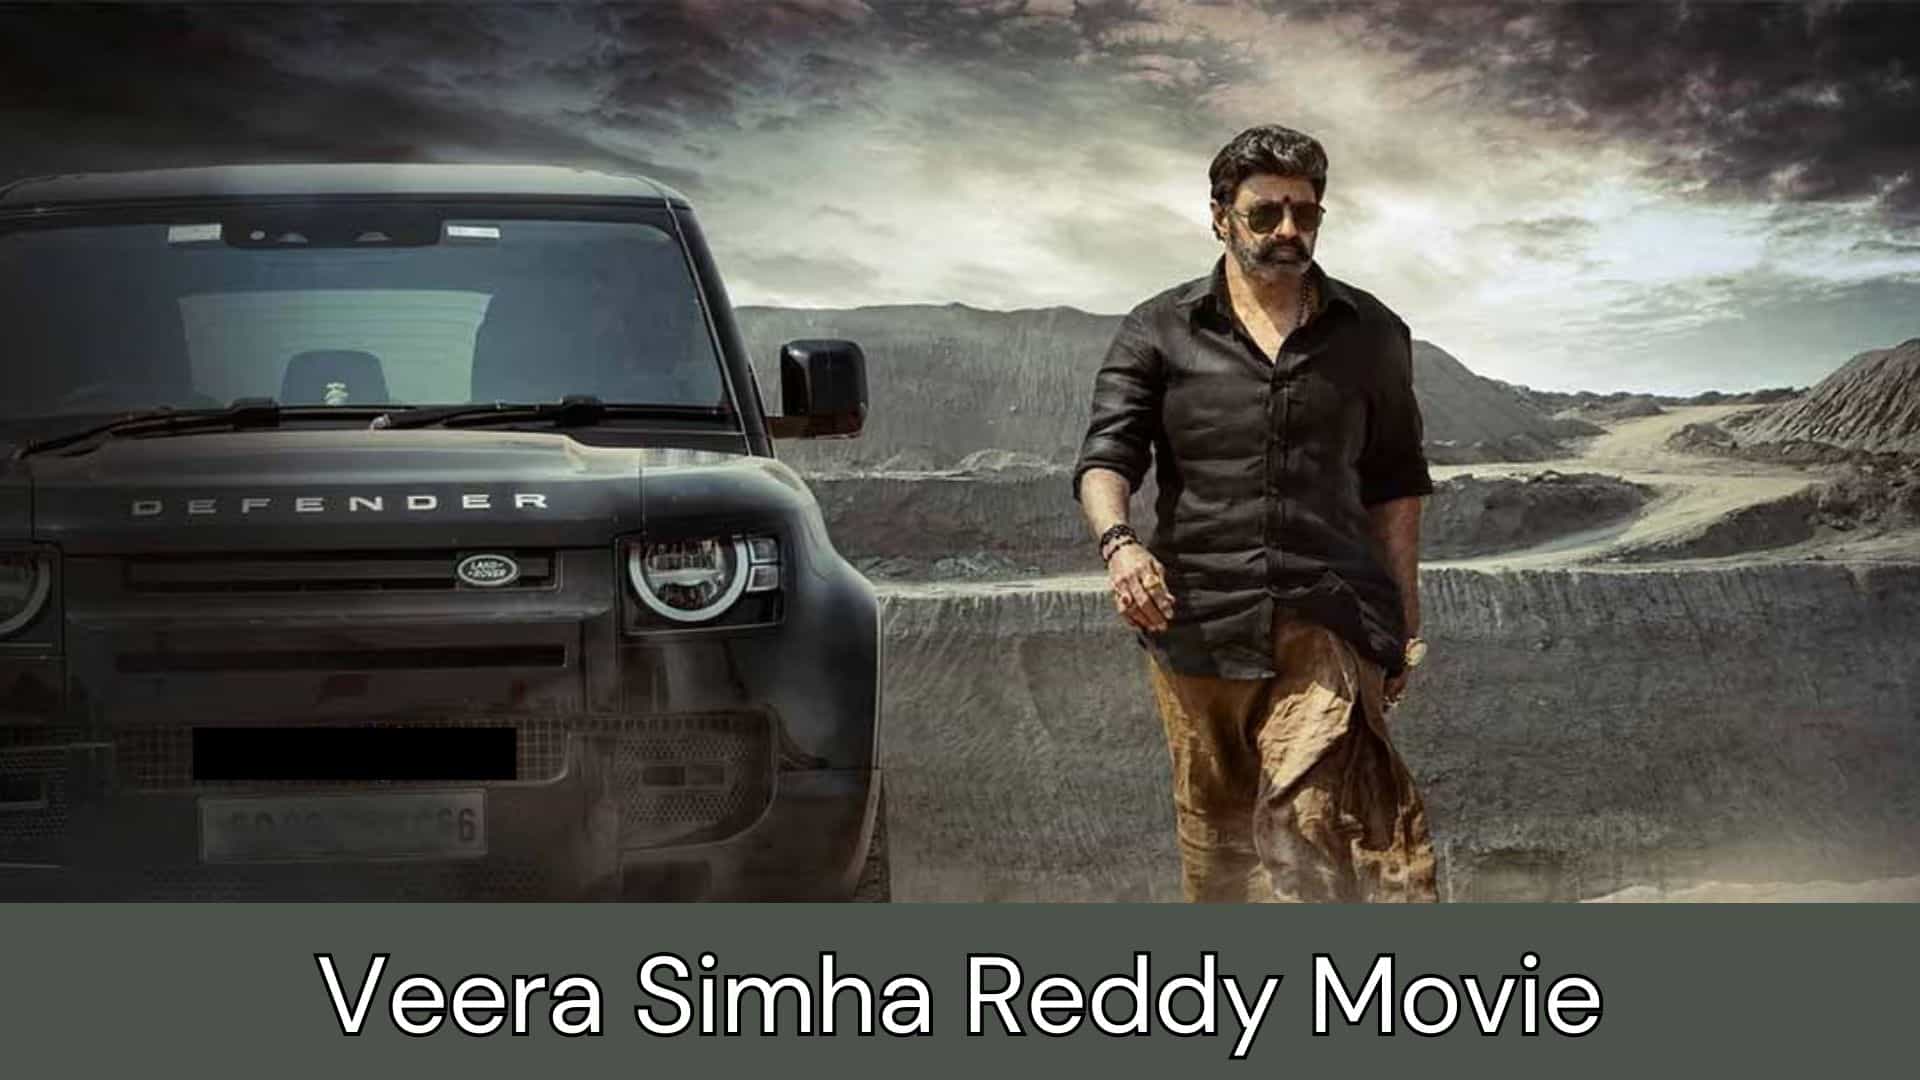 Veera Simha Reddy Movie Review, Cast, Director, Collection